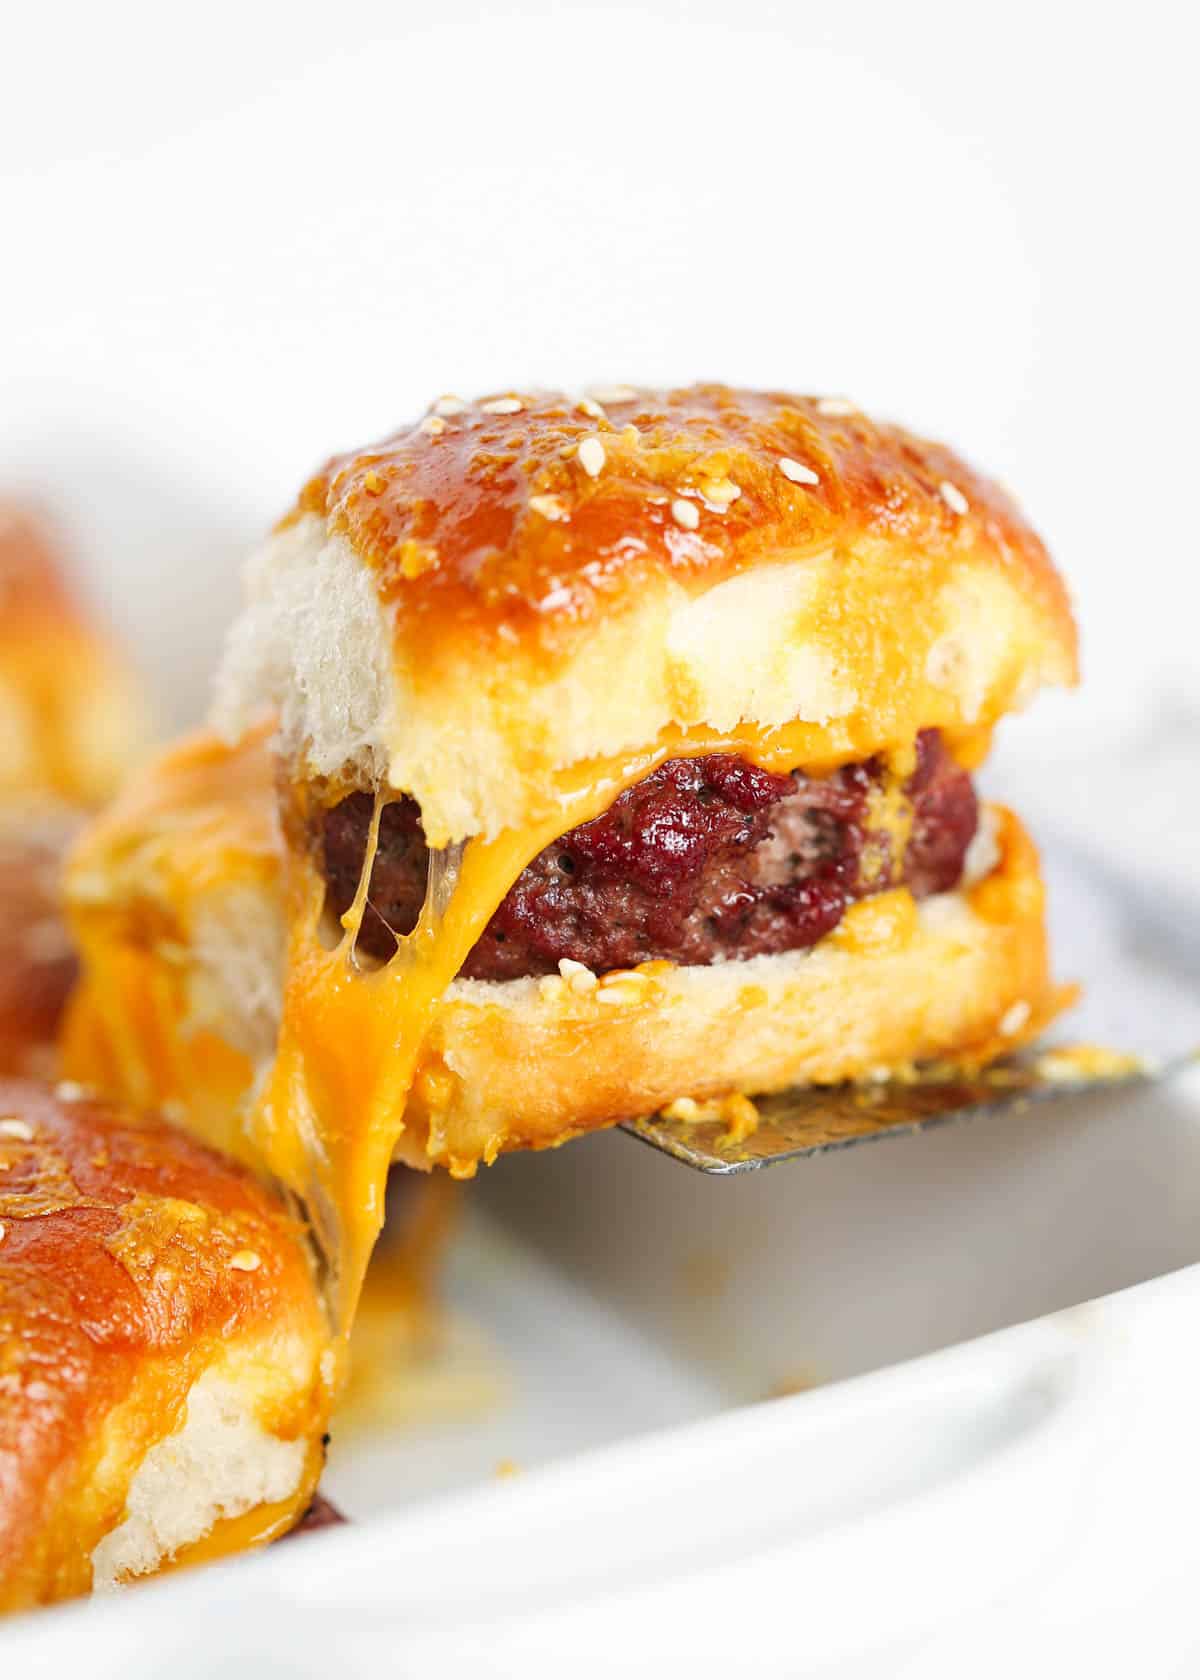 Best cheeseburger sliders in a dish.